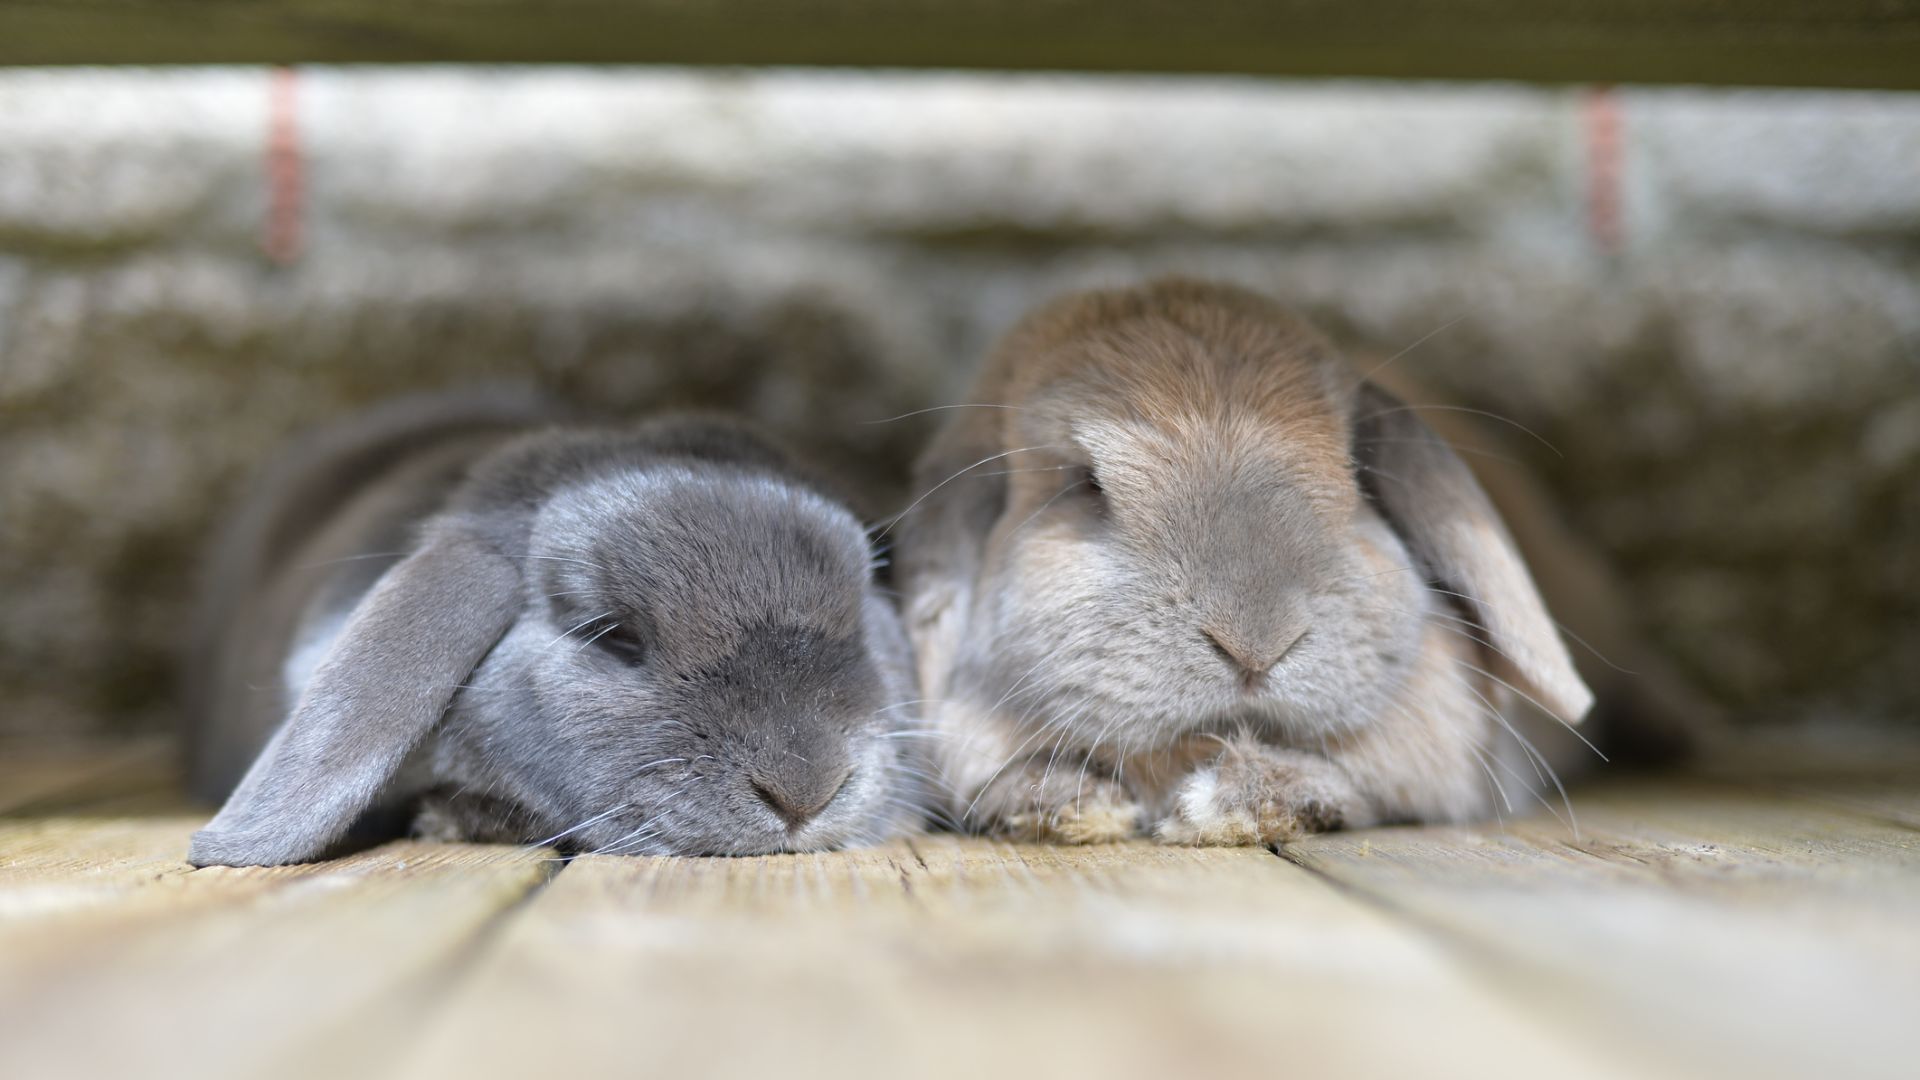 <p>                     Rabbits are unable to vomit. They have a strong cardiac sphincter (muscle) that sits at the top of the stomach, preventing them from vomiting. This means when your rabbit has an anesthetic for any reason, they should not be starved, as there is no risk that they will vomit when anaesthetized (unlike cats, dogs and humans). It also means that if your rabbit eats something dangerous, such as a foreign object, or something poisonous then they cannot be made to vomit. In these situations, you must always contact your vet for advice straight away.                   </p>